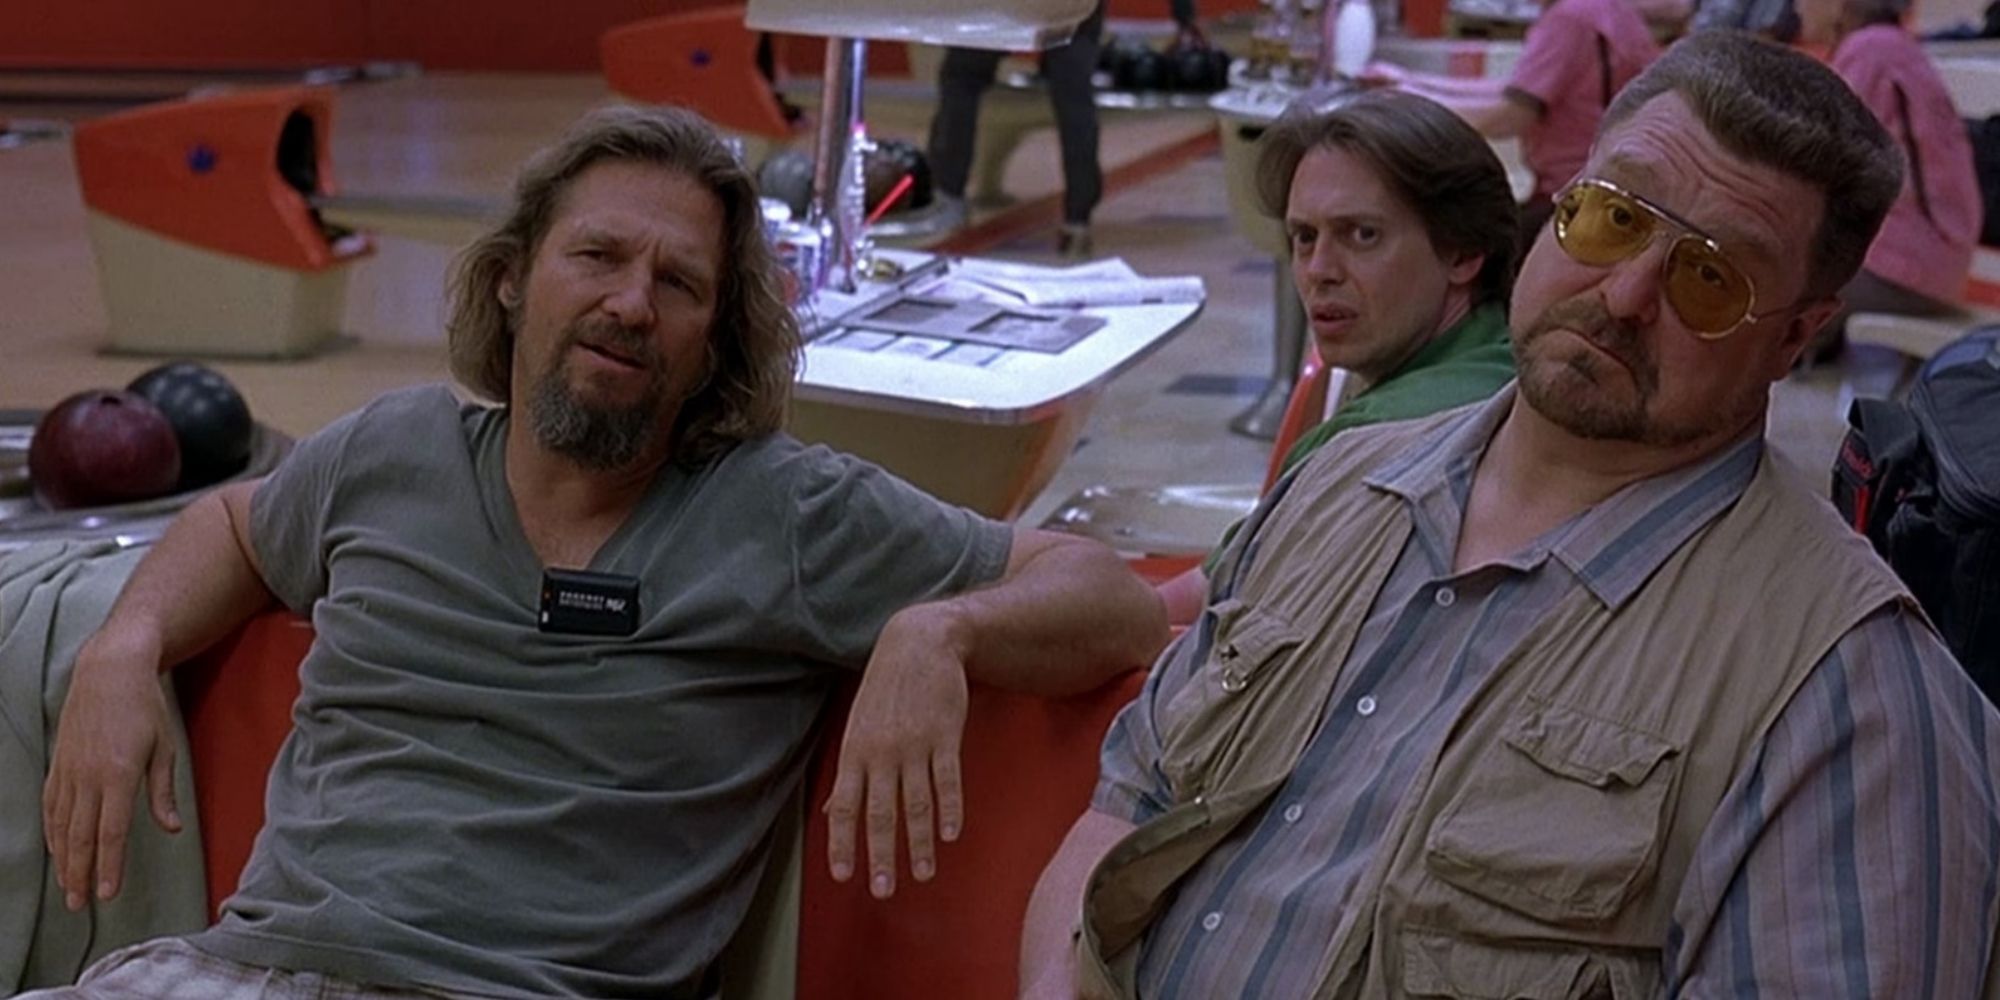 The Dude, Walter and Donny sitting in a bowling alley in 'The Big Lebowski' (1998)